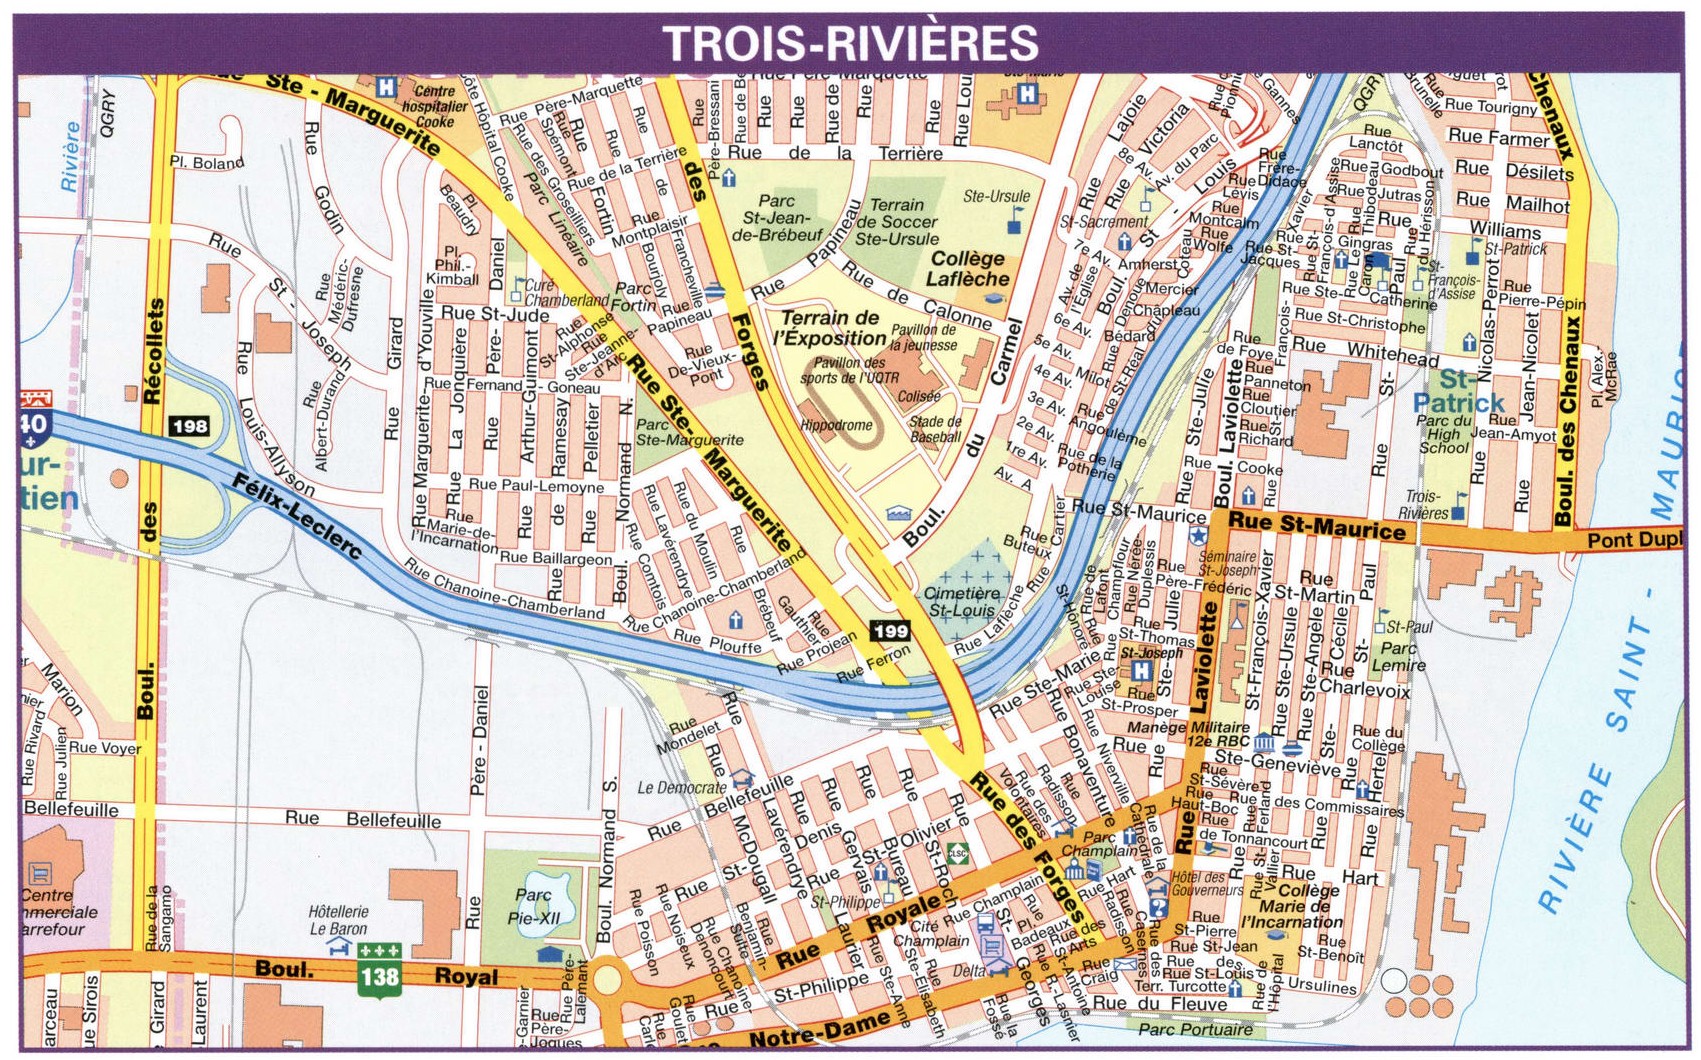 Trois-Rivieres road map